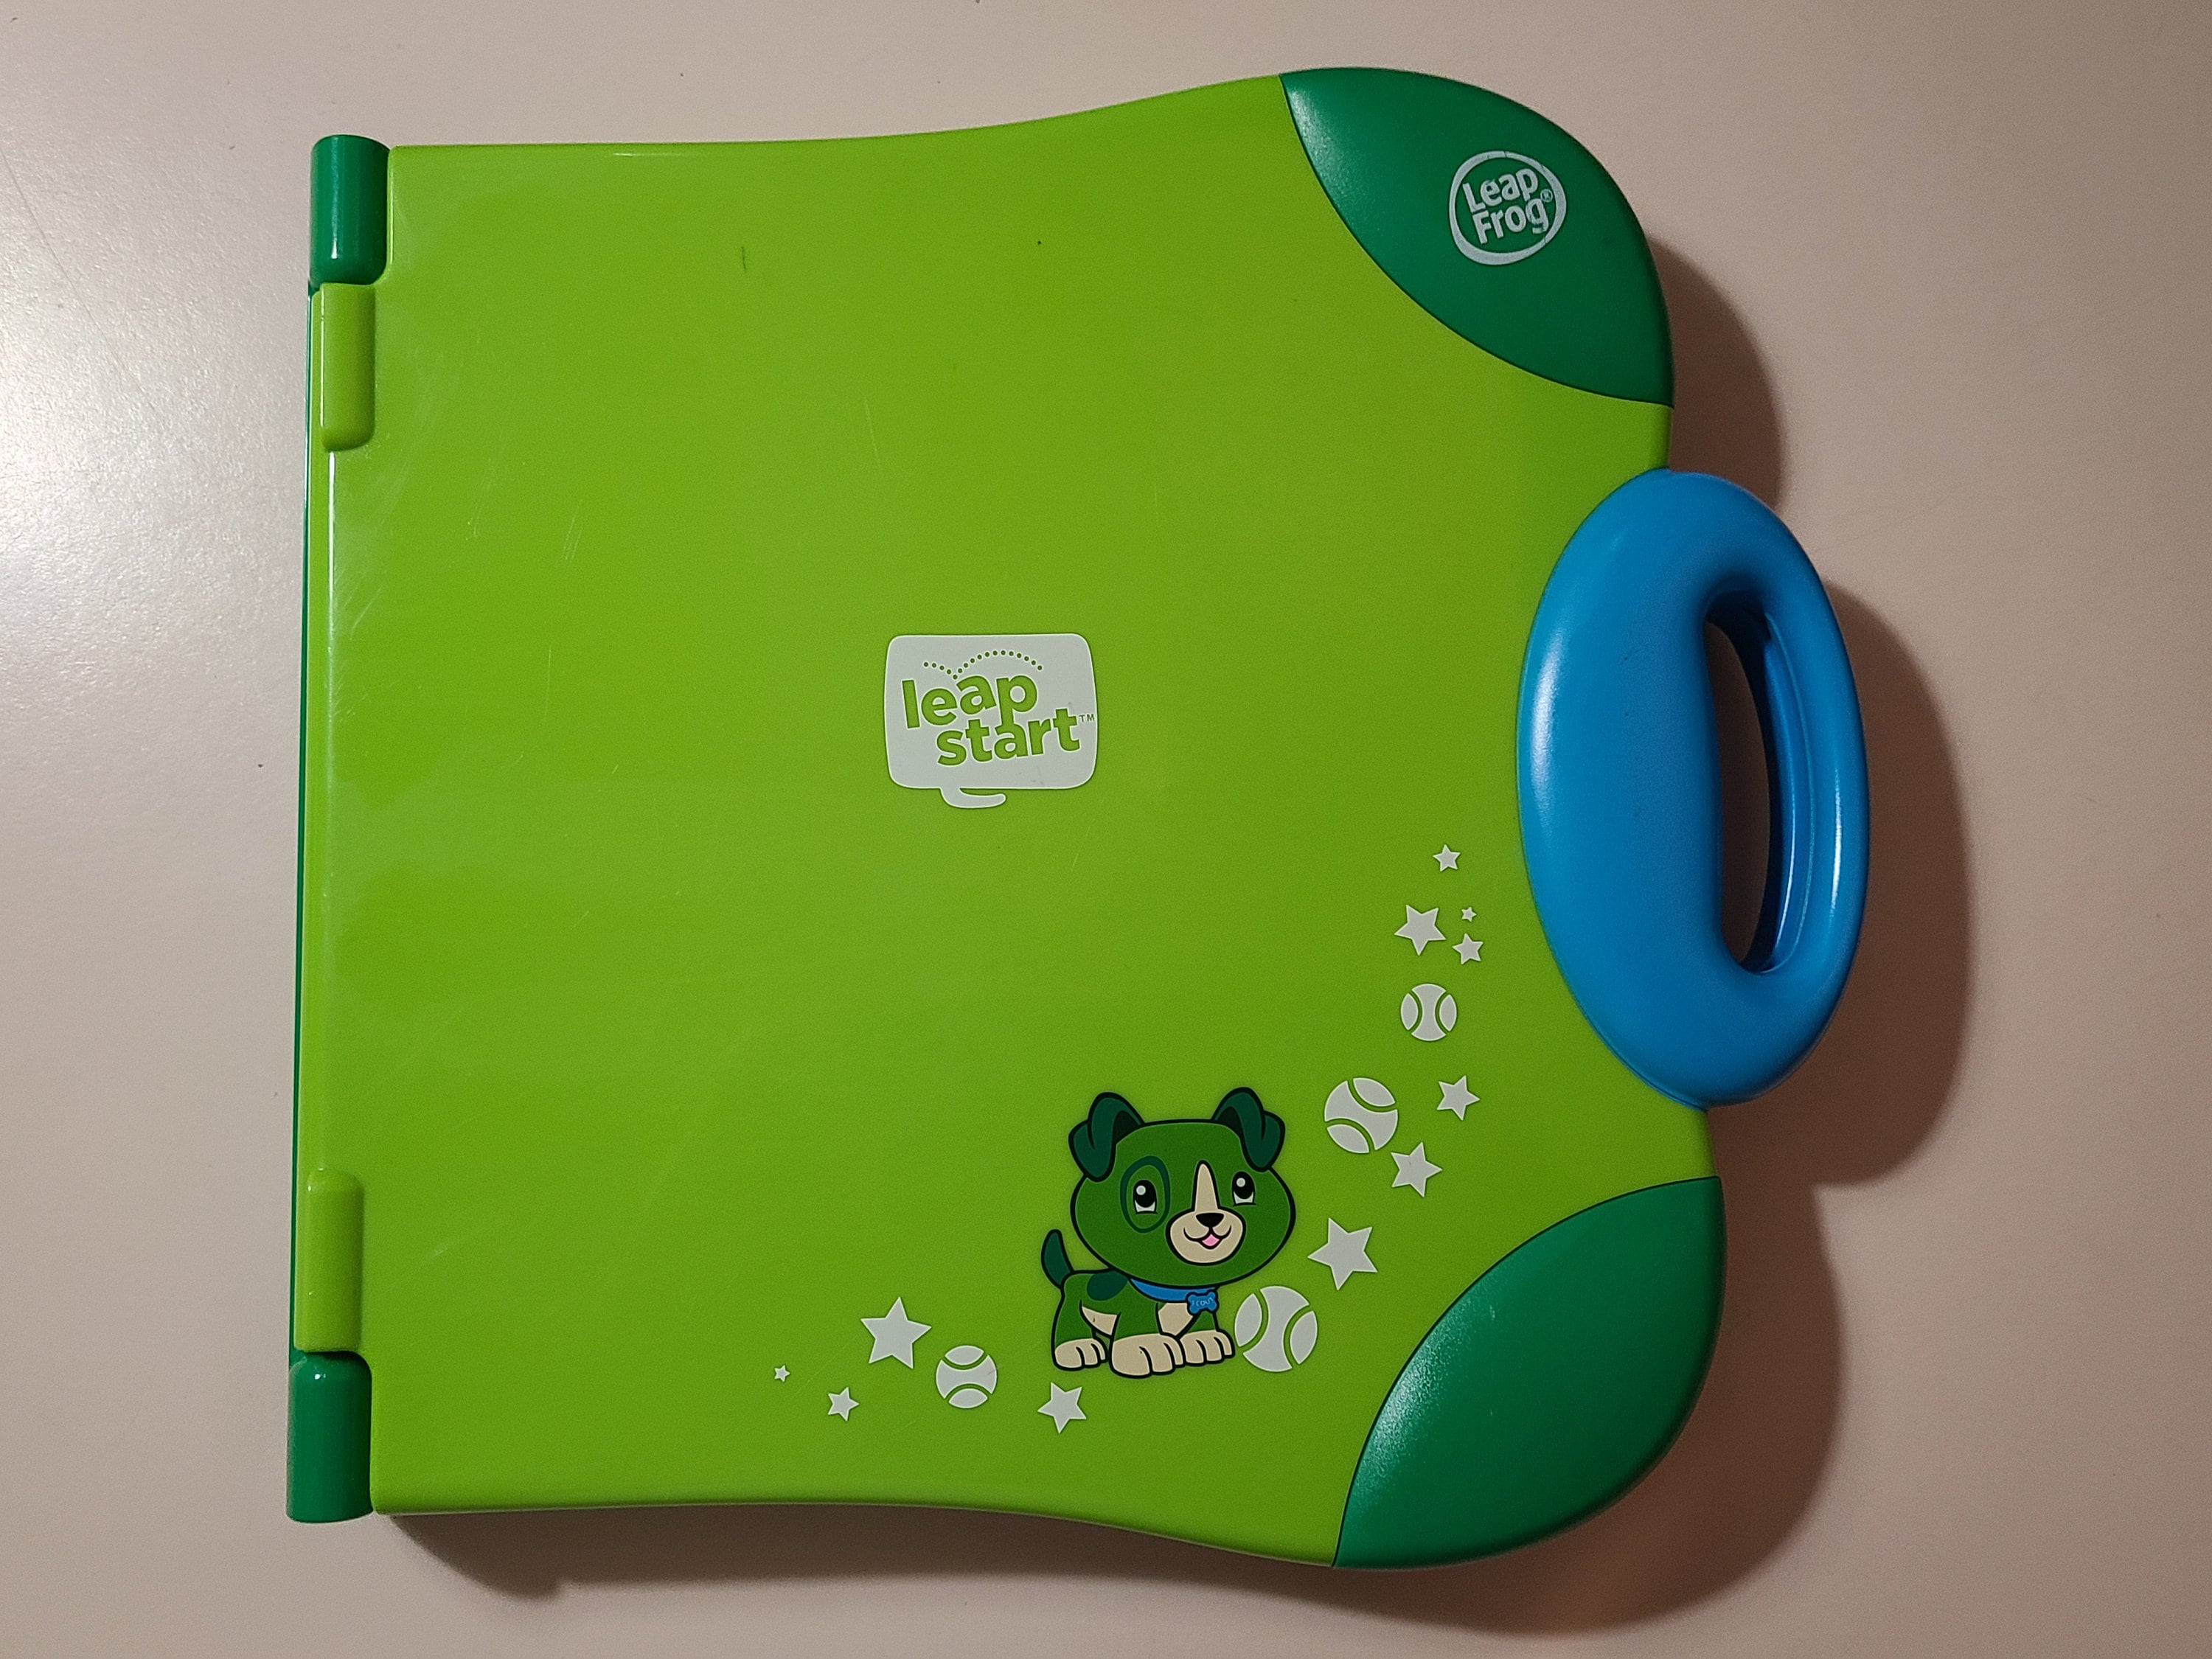 Quantum Leap IQuest Interactive Talking Handheld Kids Learning System  LeapFrog